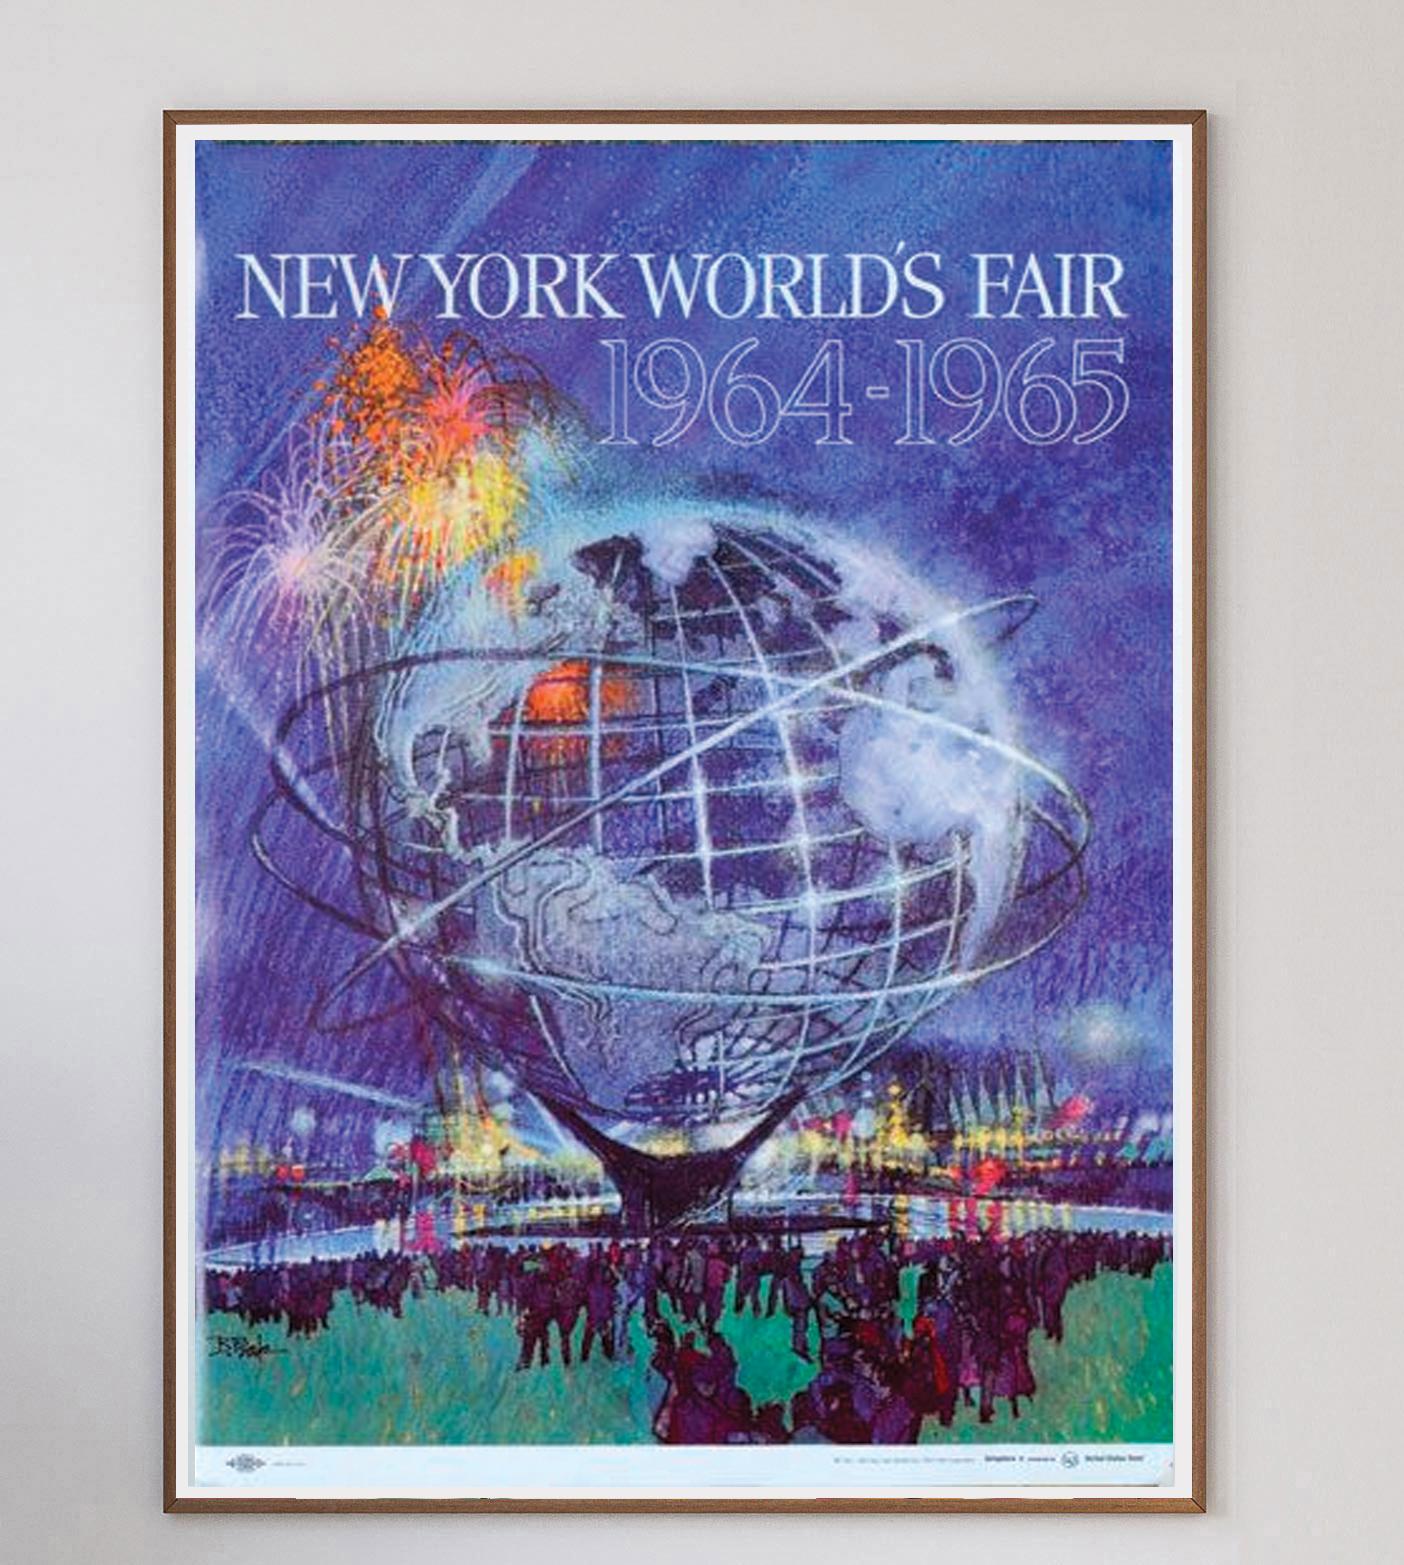 Looked back upon as the ultimate showcase of mid-century promise, the 1964/1965 New York World’s Fair was a world’s fair celebrating technology, culture, and corporation. Set amidst the backdrop of the Space Age, the fair is had a wonderful mood of